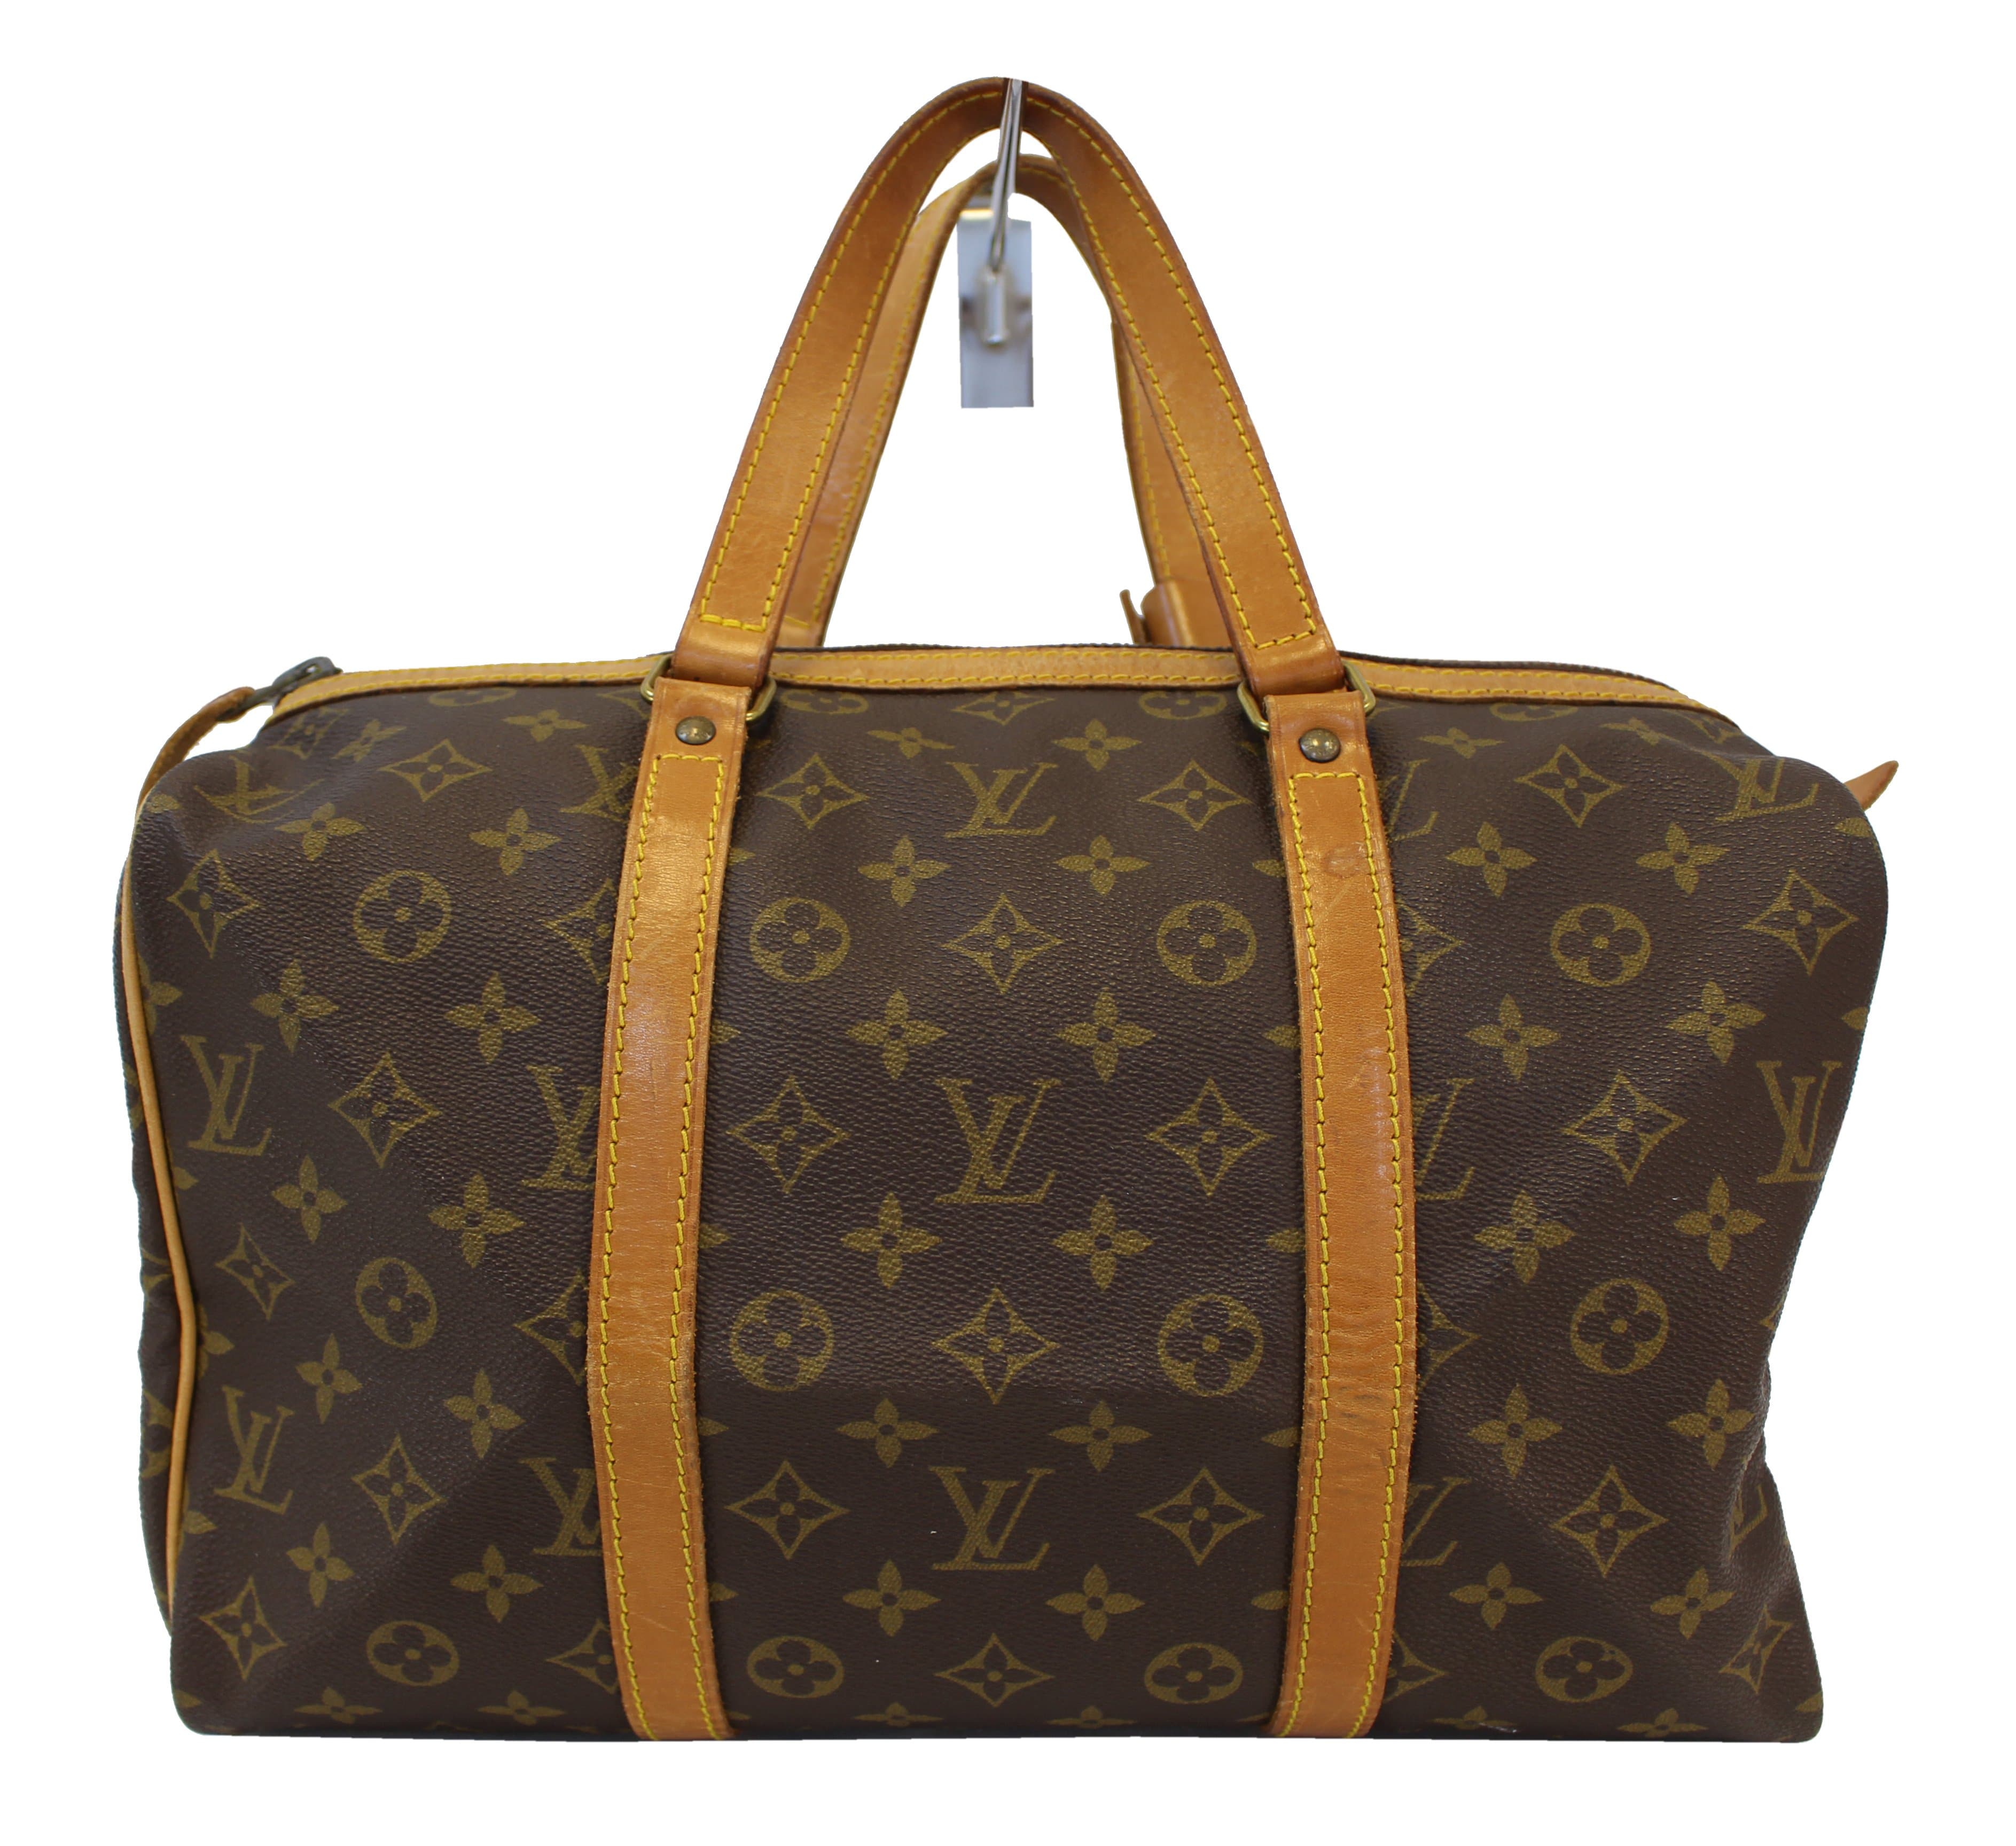 Backpack Discontinued? : r/Louisvuitton